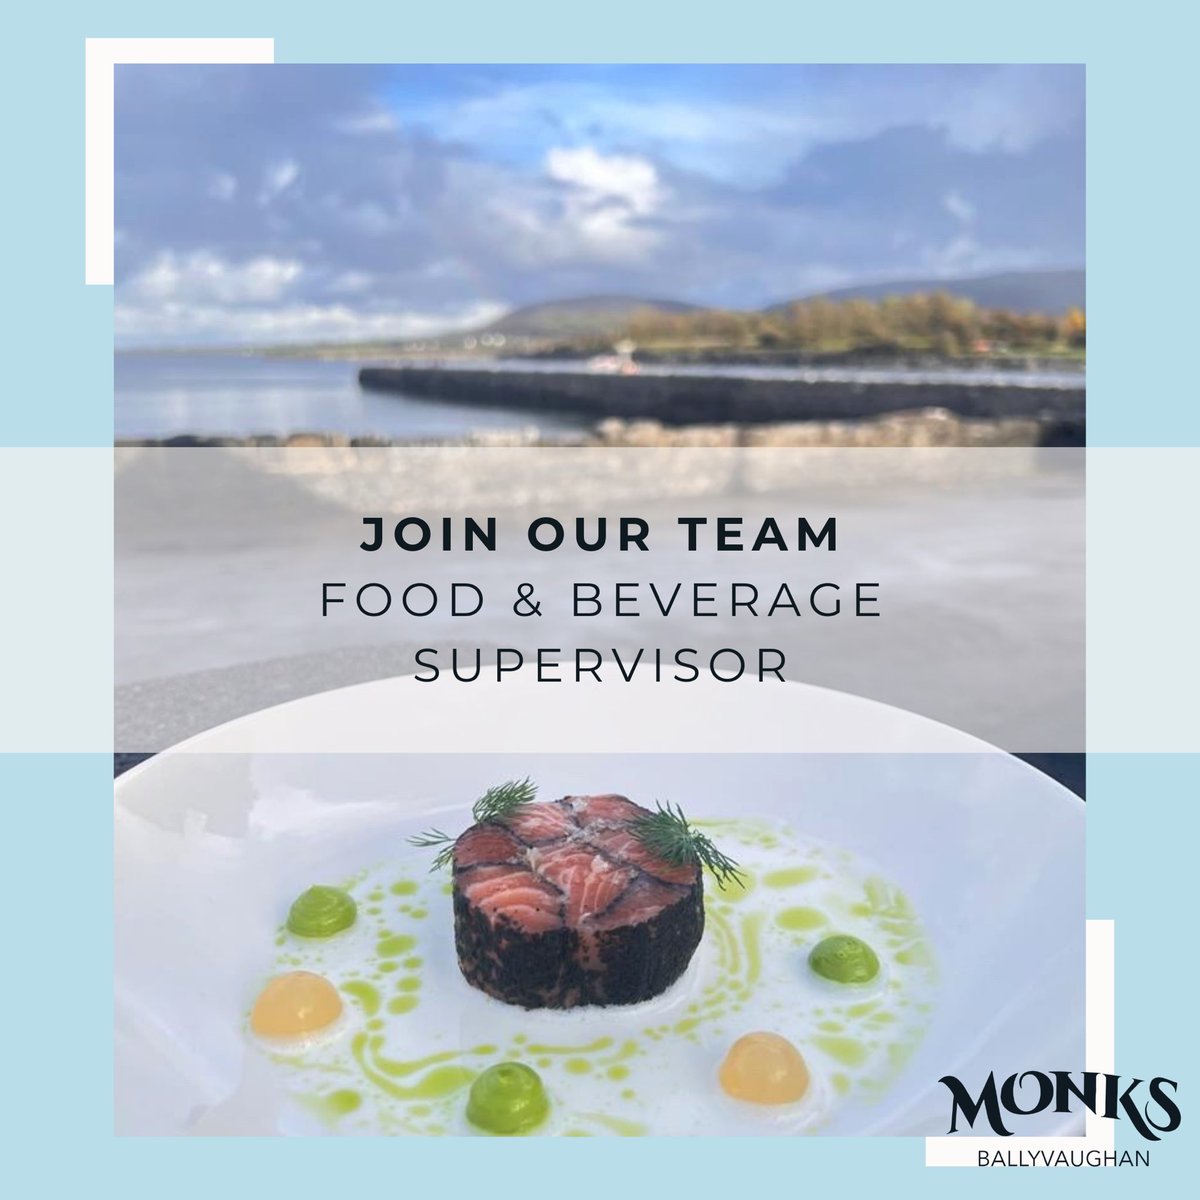 It’s the Monks #jobfairy here! We have a lovely opportunity for a dynamic individual to join our team. Relocation packages & accommodation available for the right candidate. Email chef@monks.ie for more info. 🌊